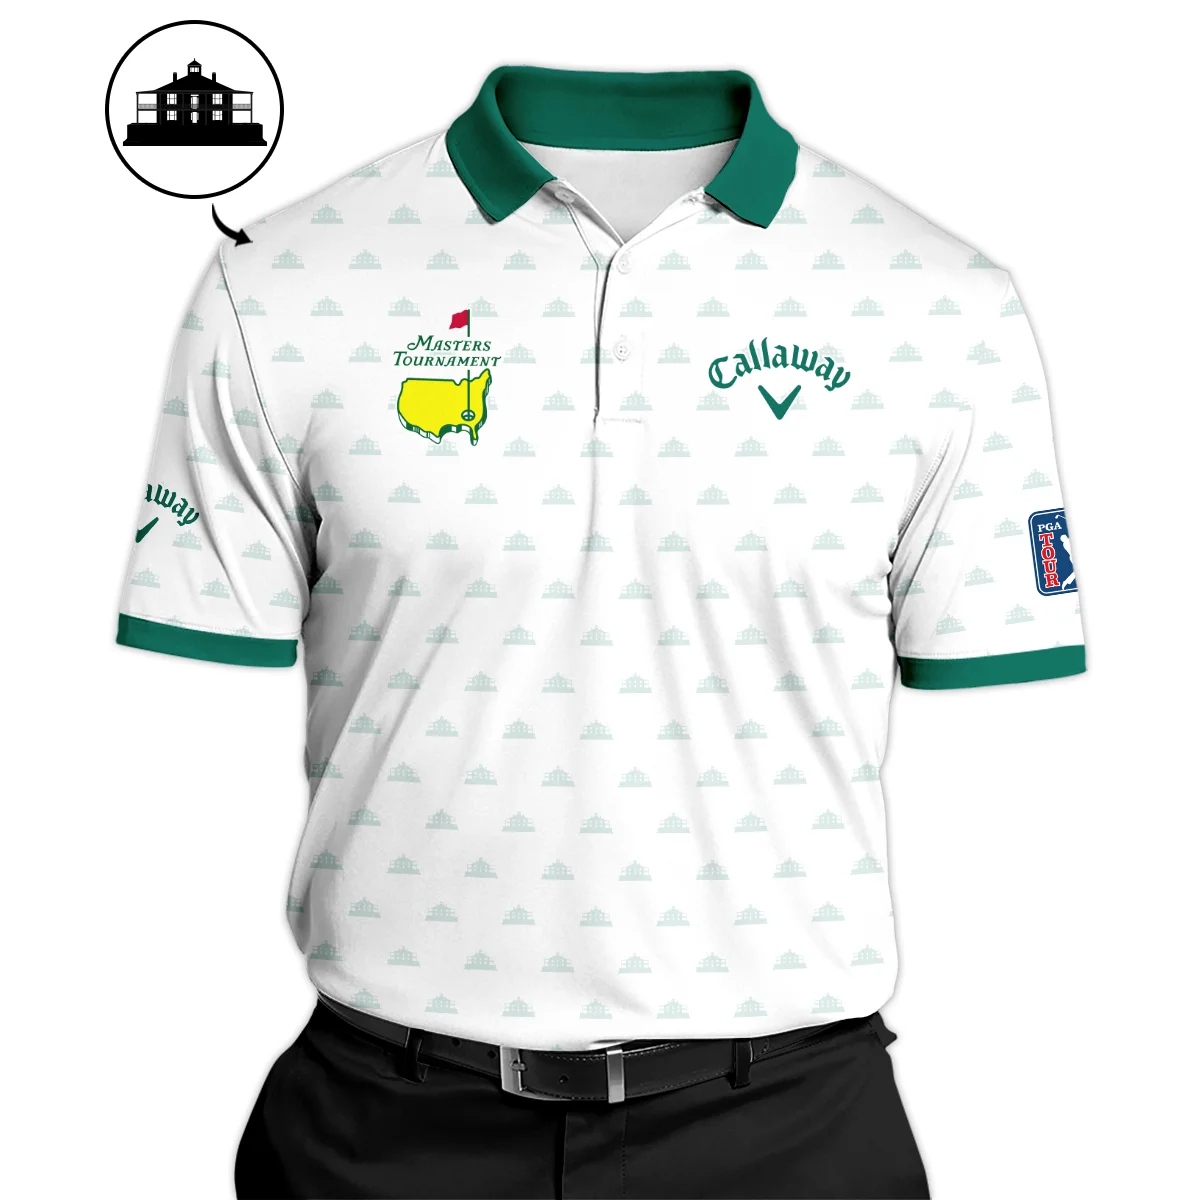 Masters Tournament Golf Sport Callaway Polo Shirt Sports Cup Pattern White Green Polo Shirt For Men